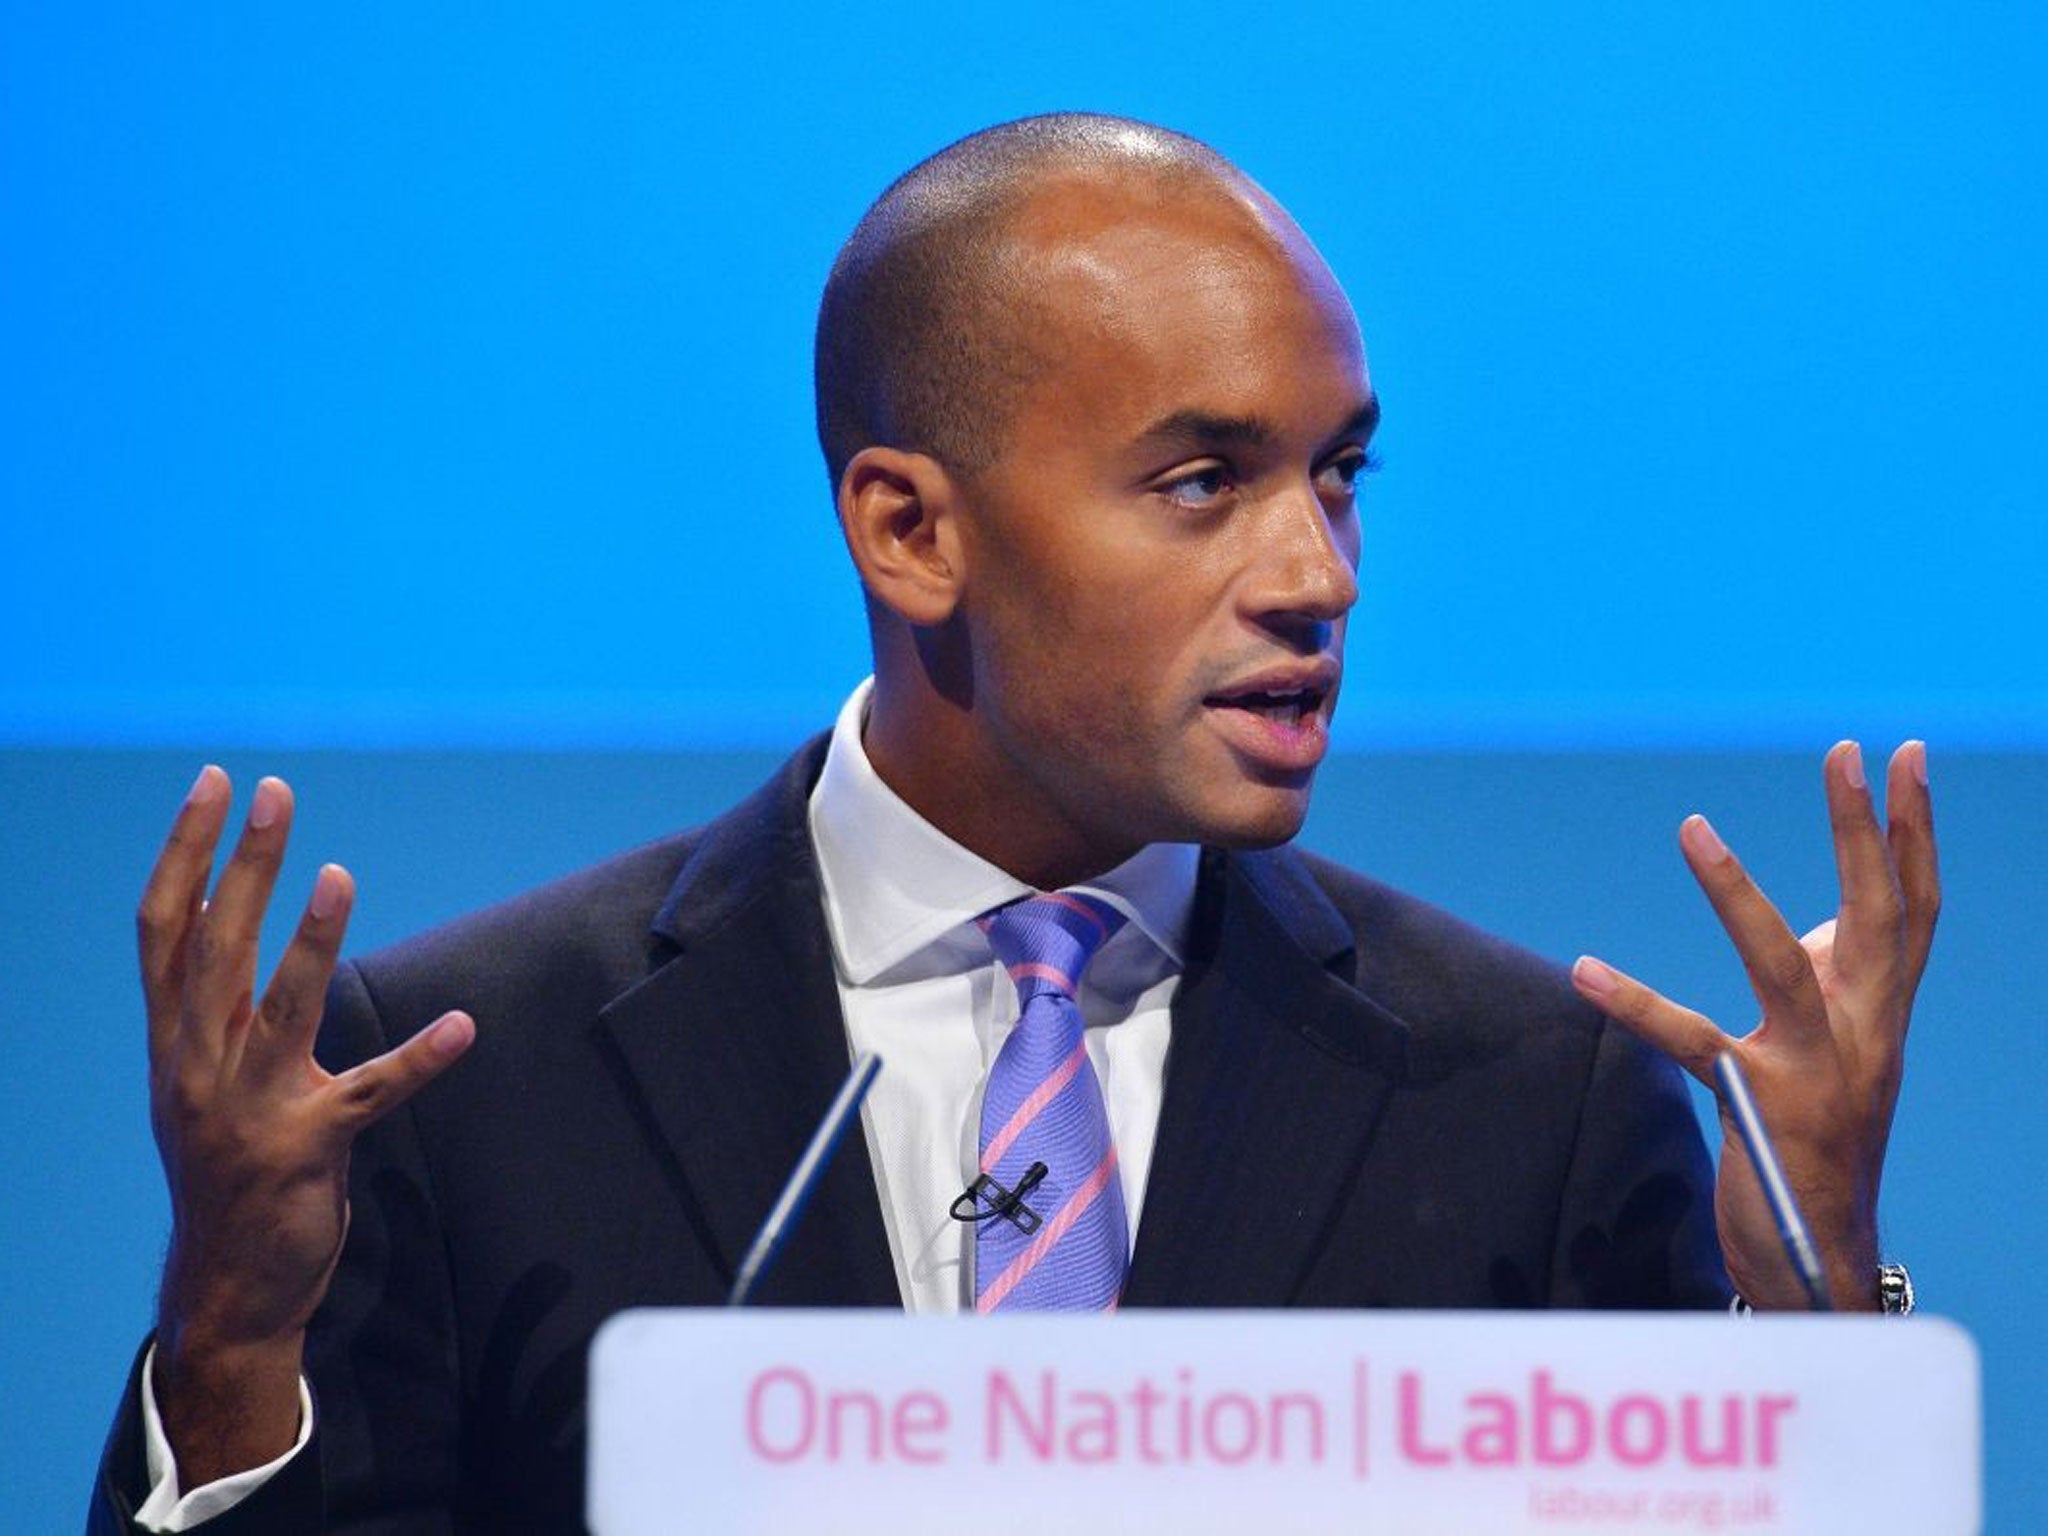 Chuka Umunna is a future contender for the Labour party leadership